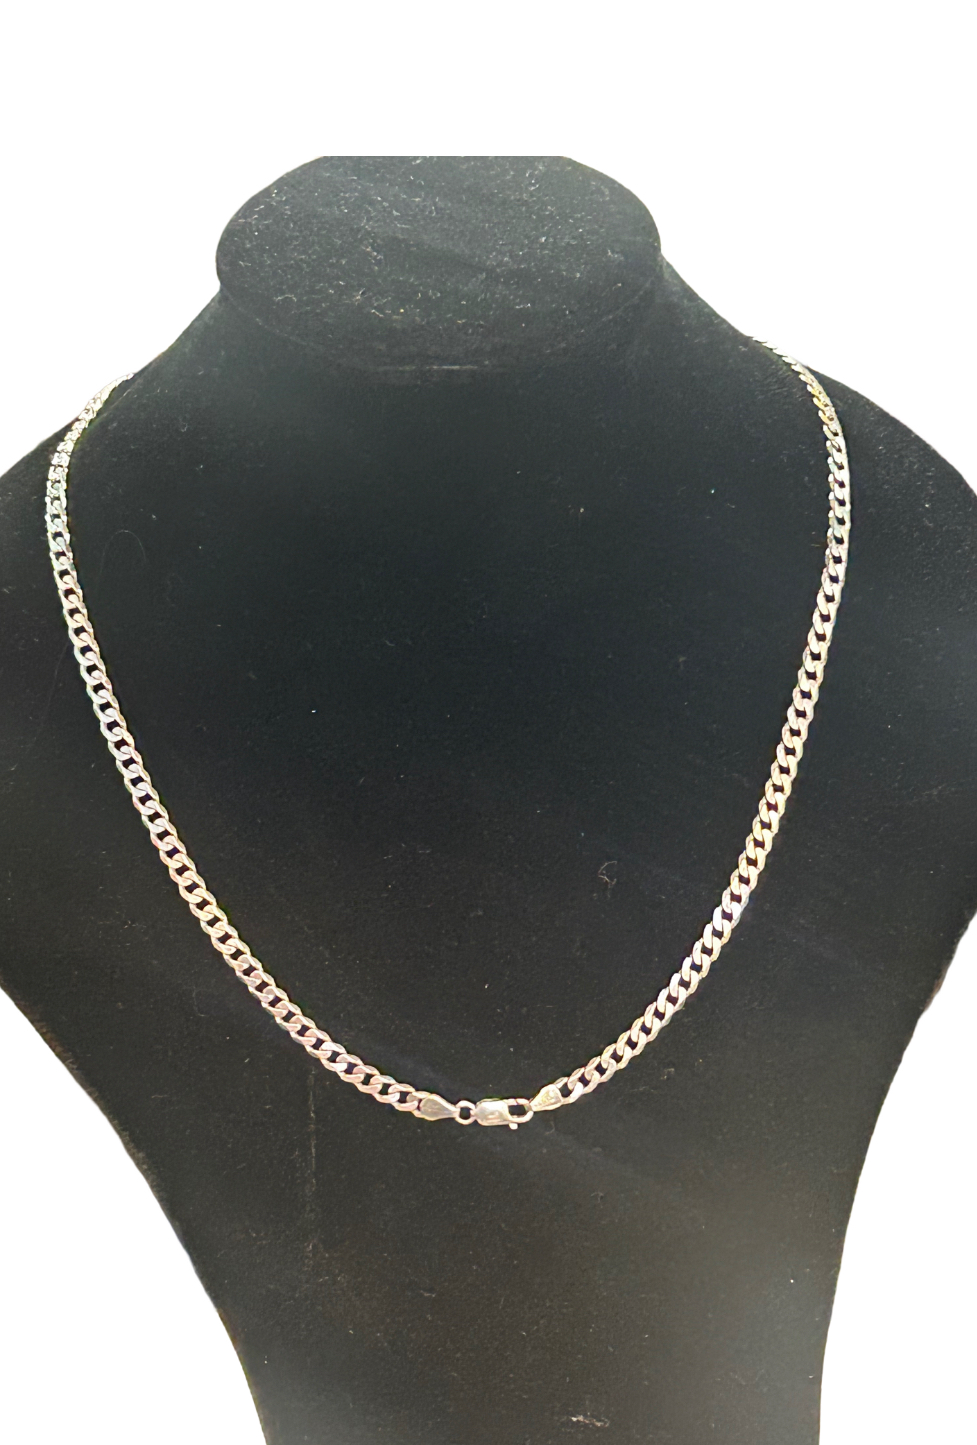 9ct White gold chain Weight 17.8g Length 50 cm